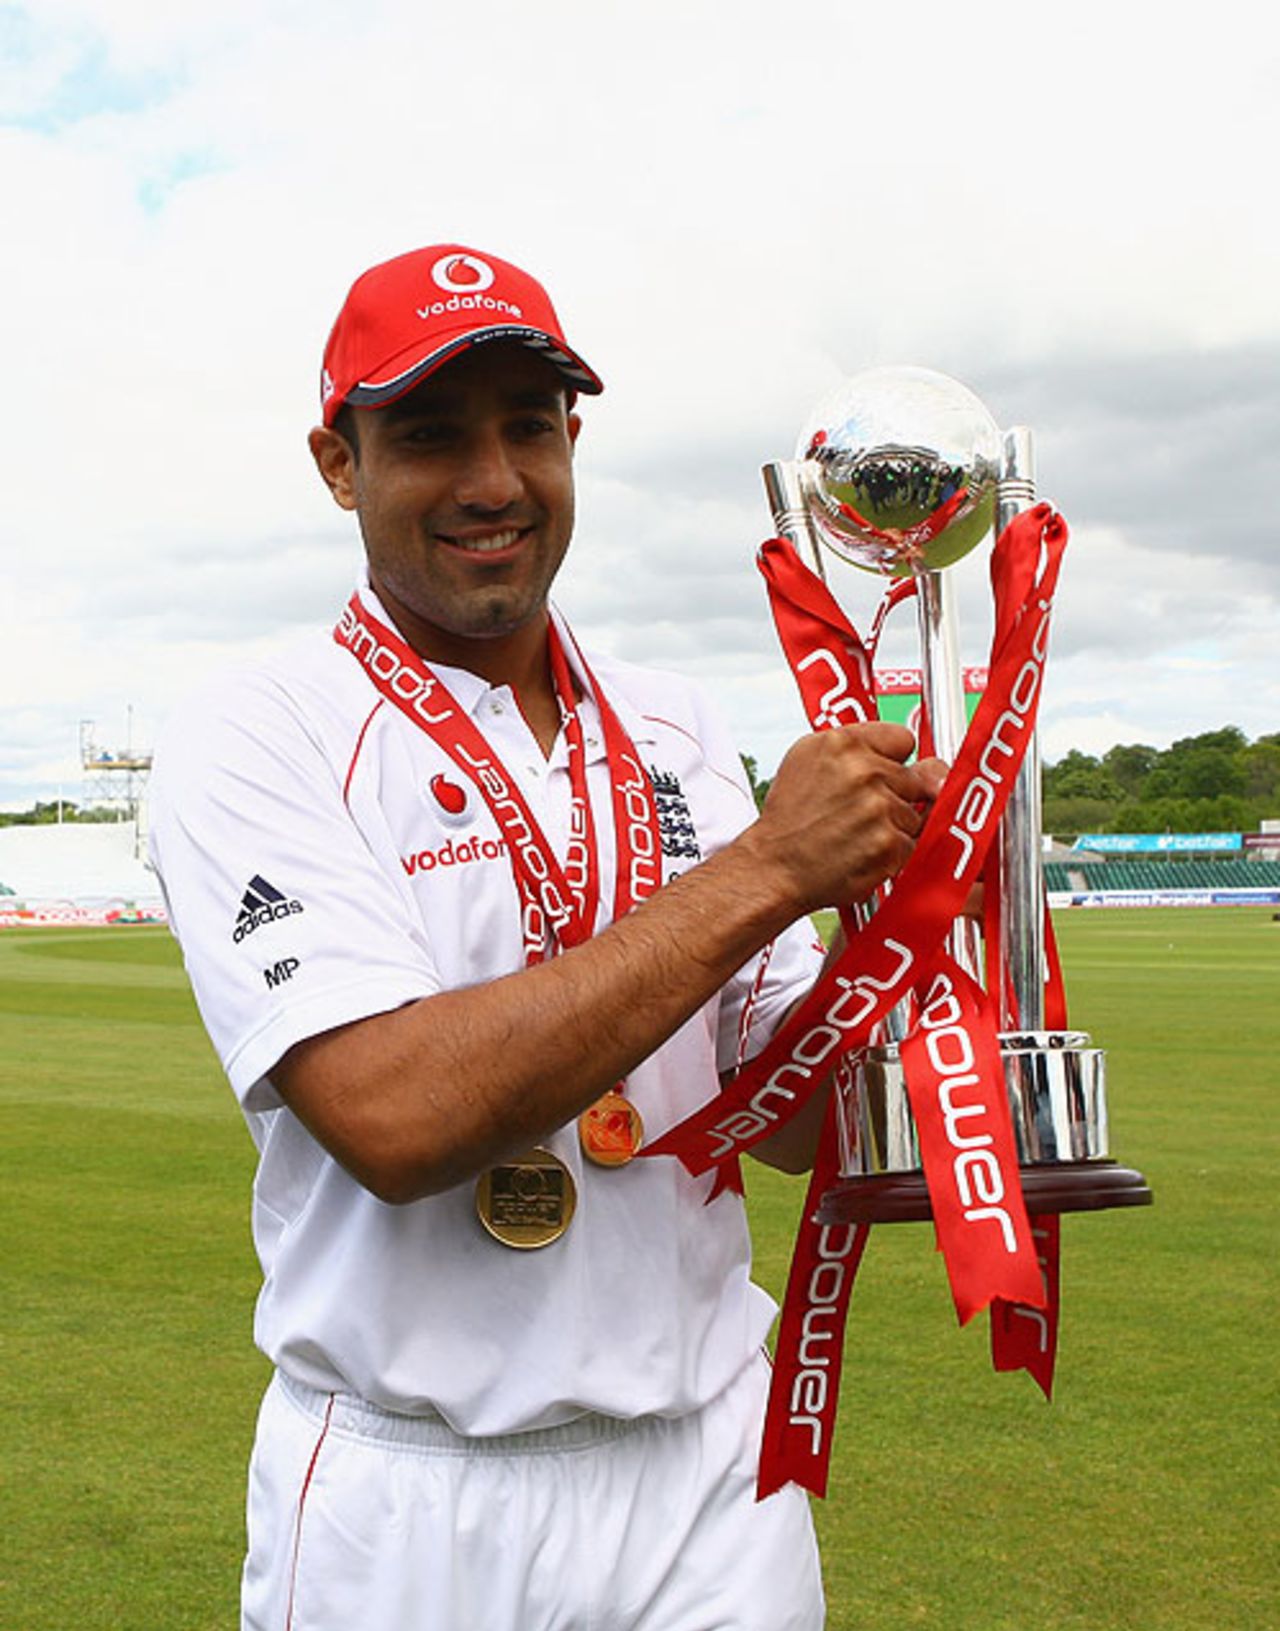 Man of the Series Ravi Bopara poses with the trophy after England's 2-0 win, England v West Indies, 2nd Test, Chester-le-Street, 5th day, May 18, 2009